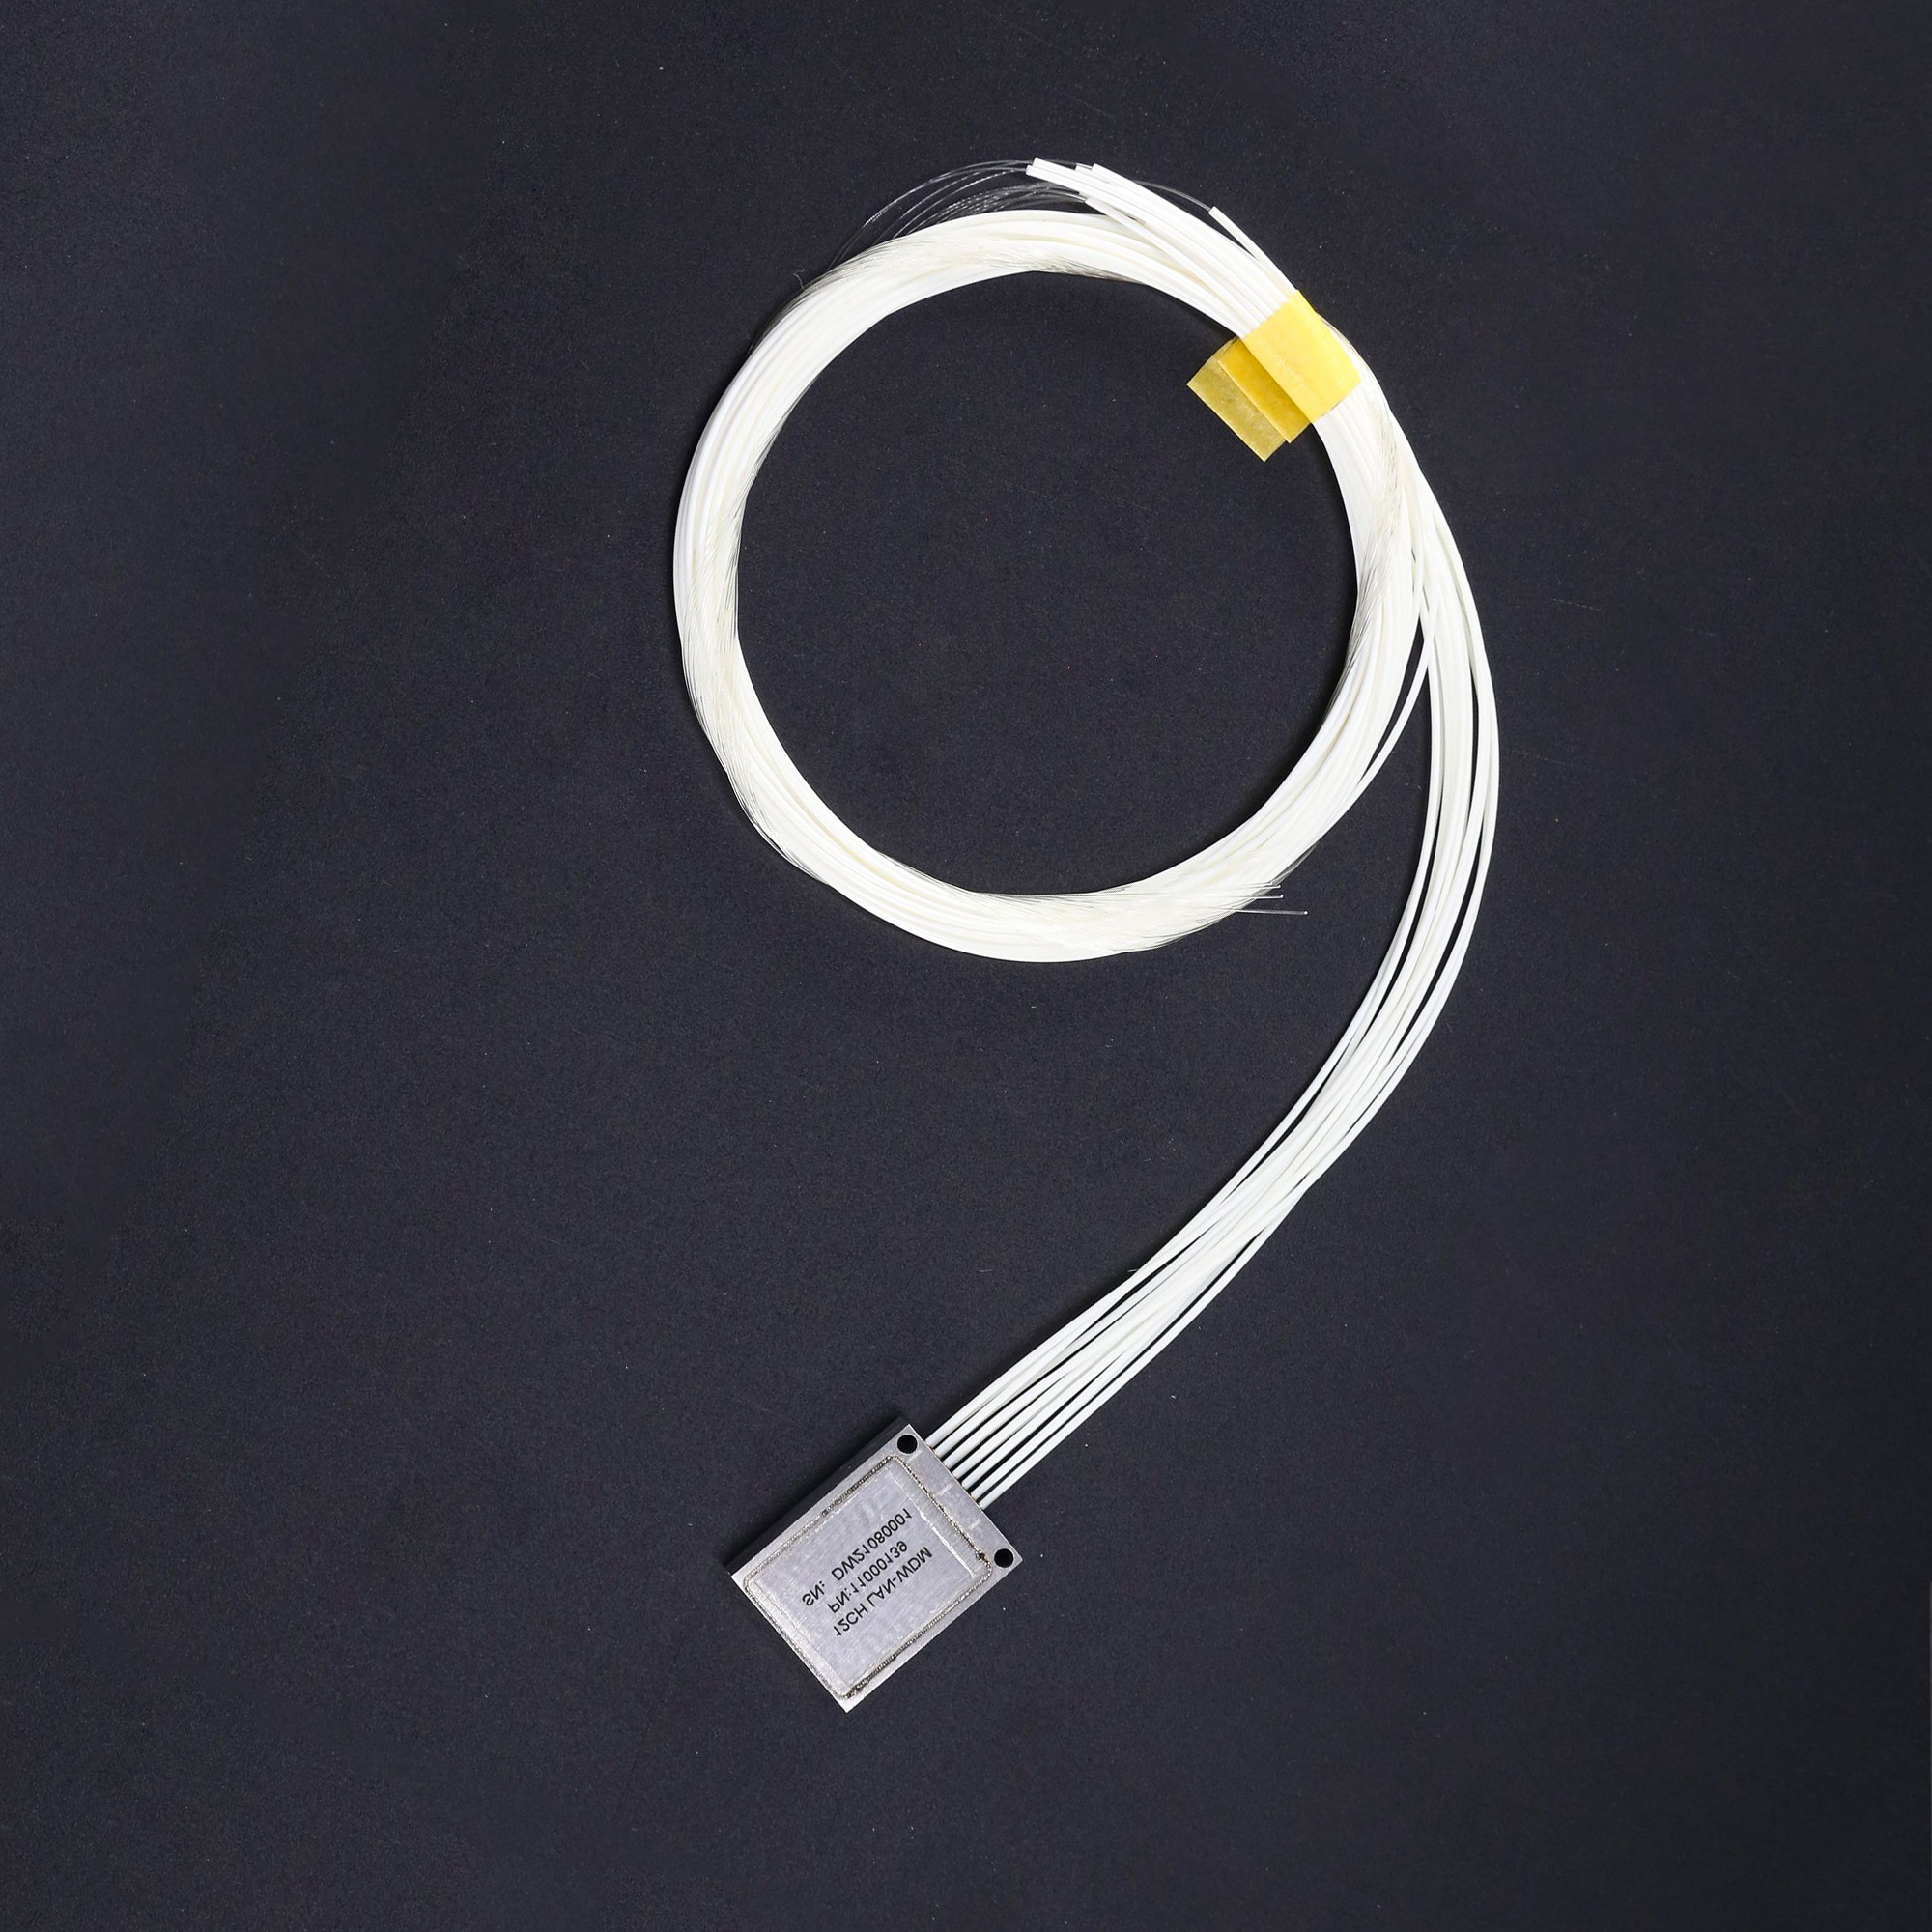 11Channels 100GHz C22-C48 or ITU, 1.7dB Typical IL, Unilateral fiber outlet,High